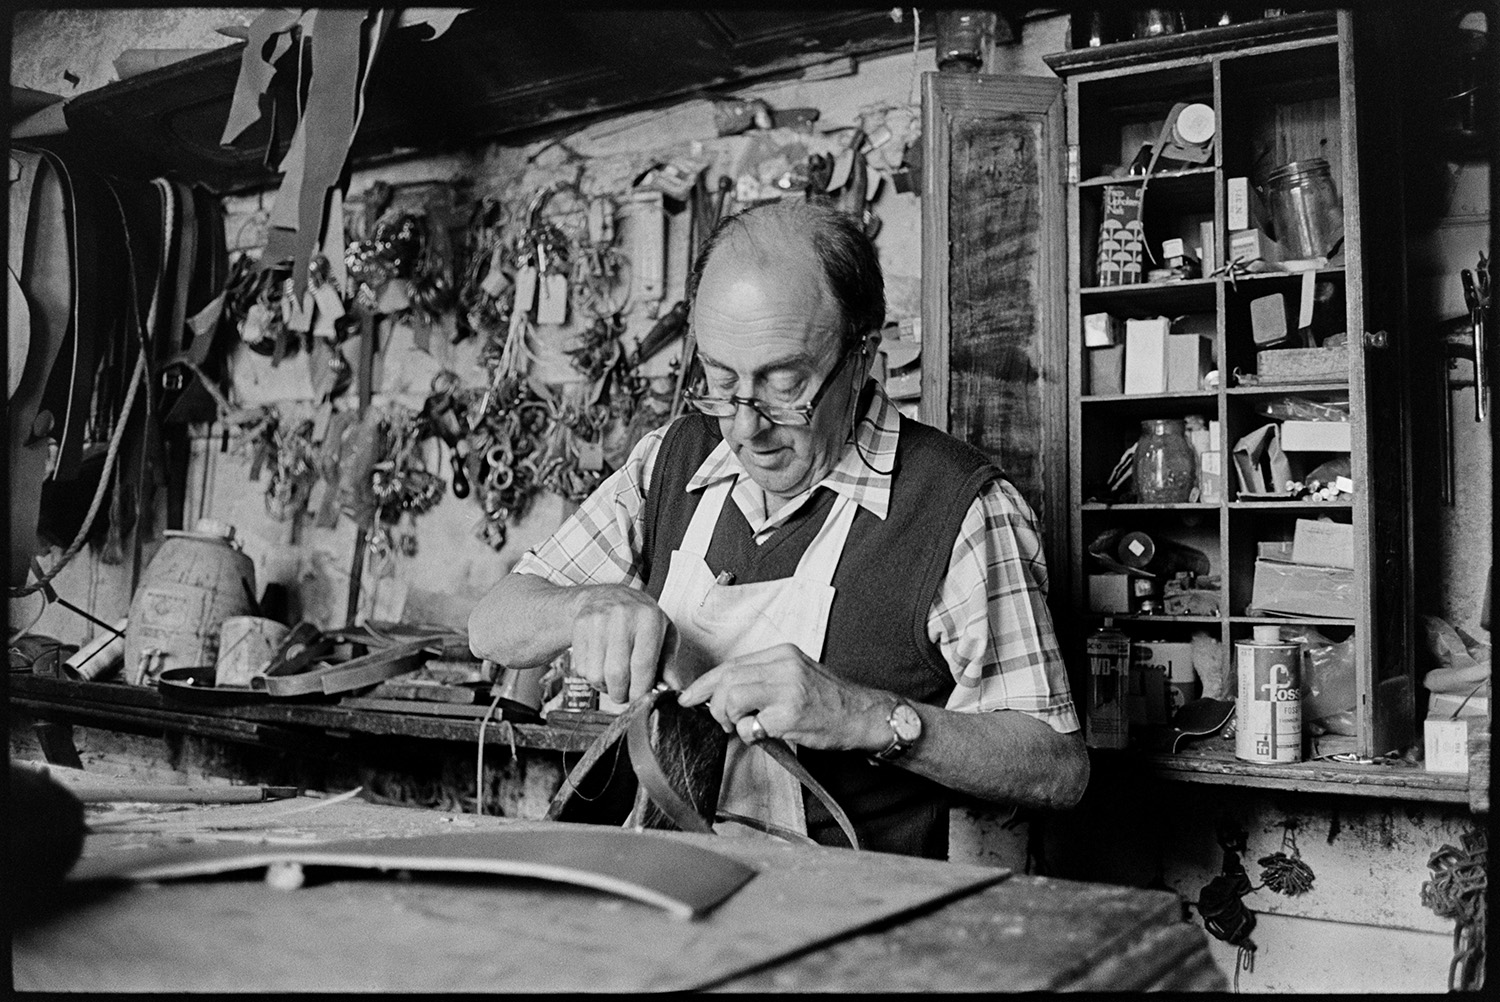 Saddler in his workshop, tools materials, goods on display. 
[Derek Johns, a saddler, making leather goods in his workshop in Buttgarden Street, Bideford. Various tools are hung up on the wall behind him.]